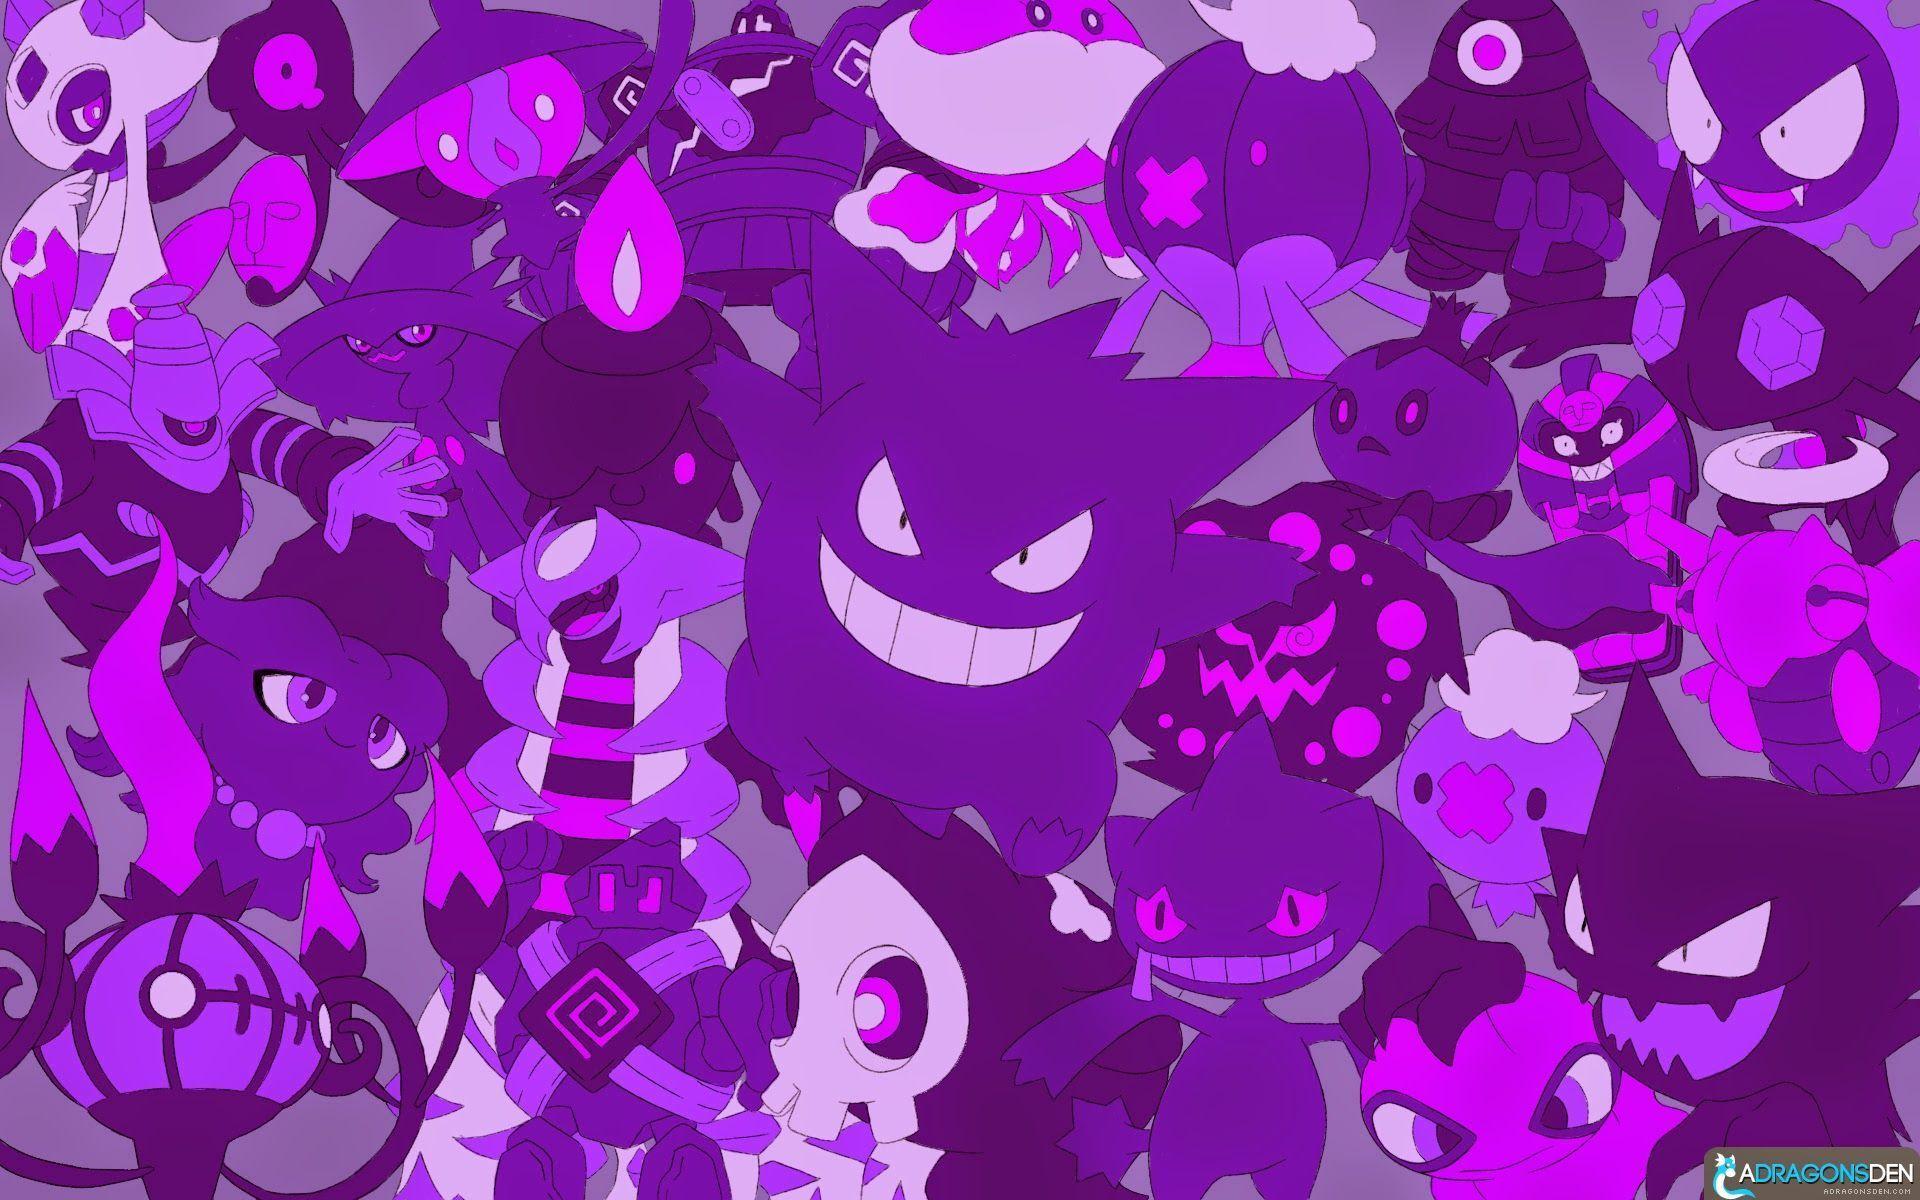 New Season of Light and Halloween loading screen available now in Pokémon  GO featuring Cosmog Guzzlord and more  Pokémon Blog